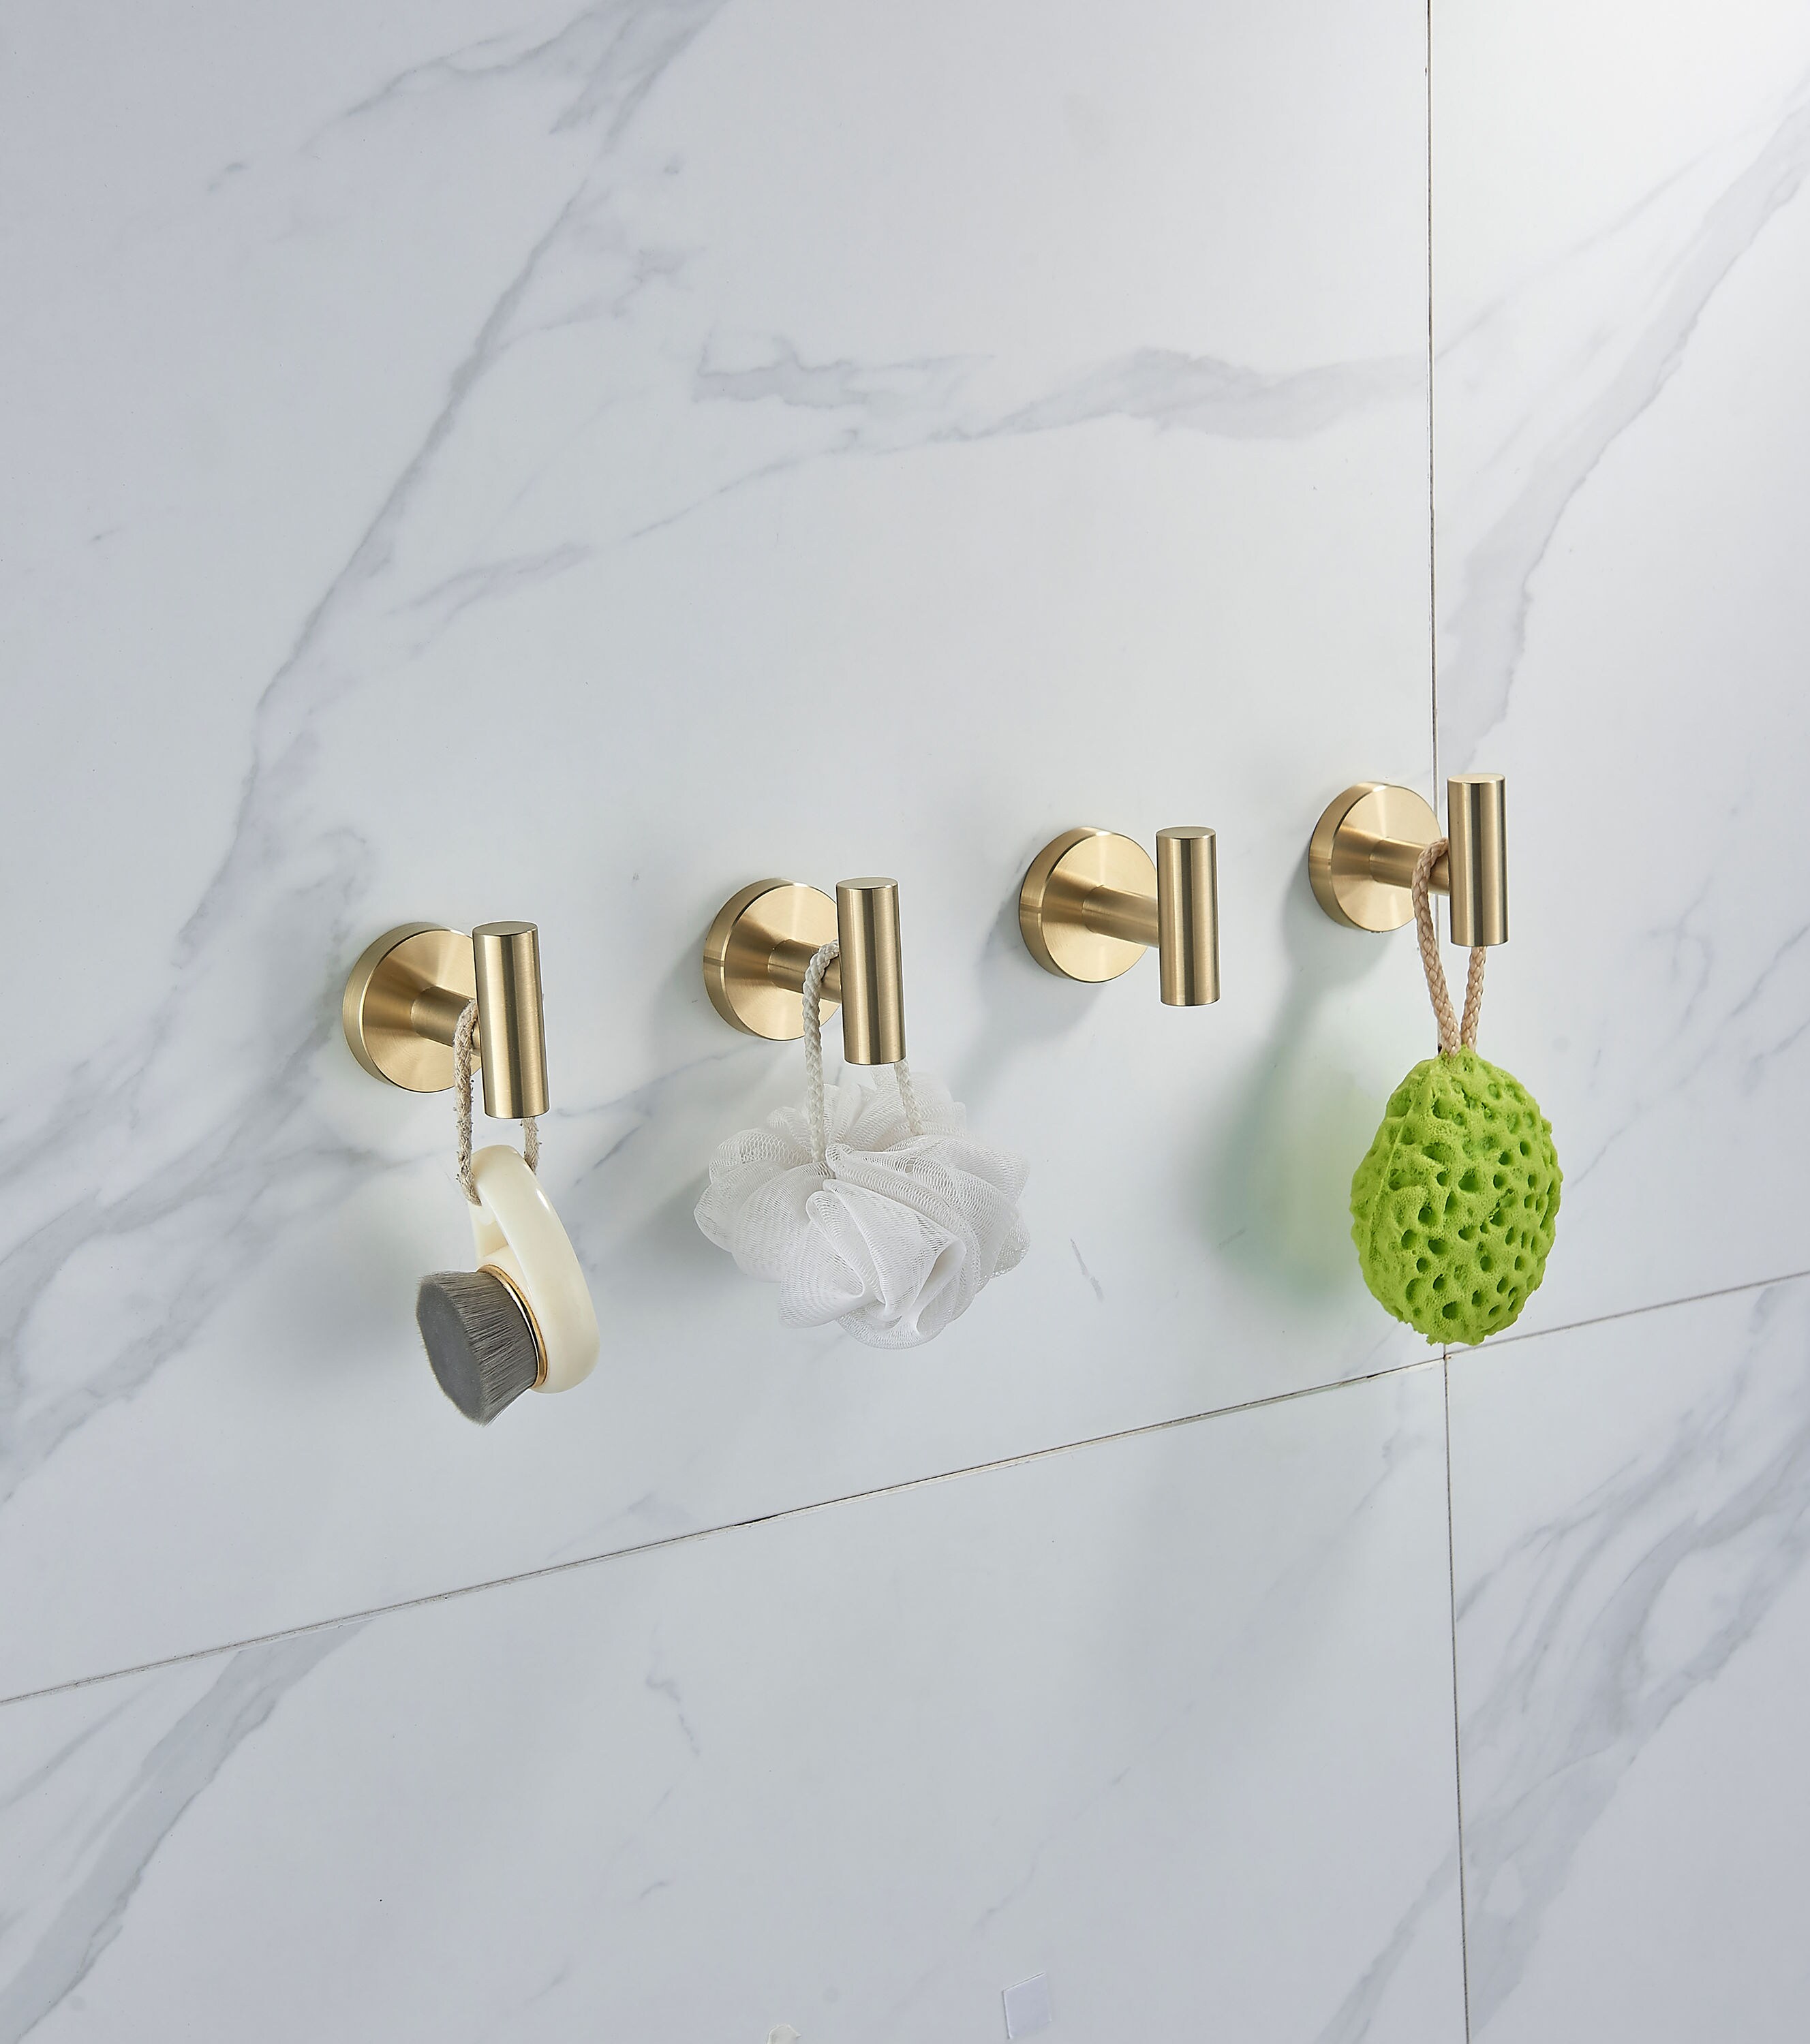 Set Of 4 Brass Ikea Towel Bar Hooks Small, Nail Free Hook For Wall, Coat,  Robe, Bathroom Gold Hat Design Ideal For Keys Item #230926 From Bao10,  $10.79